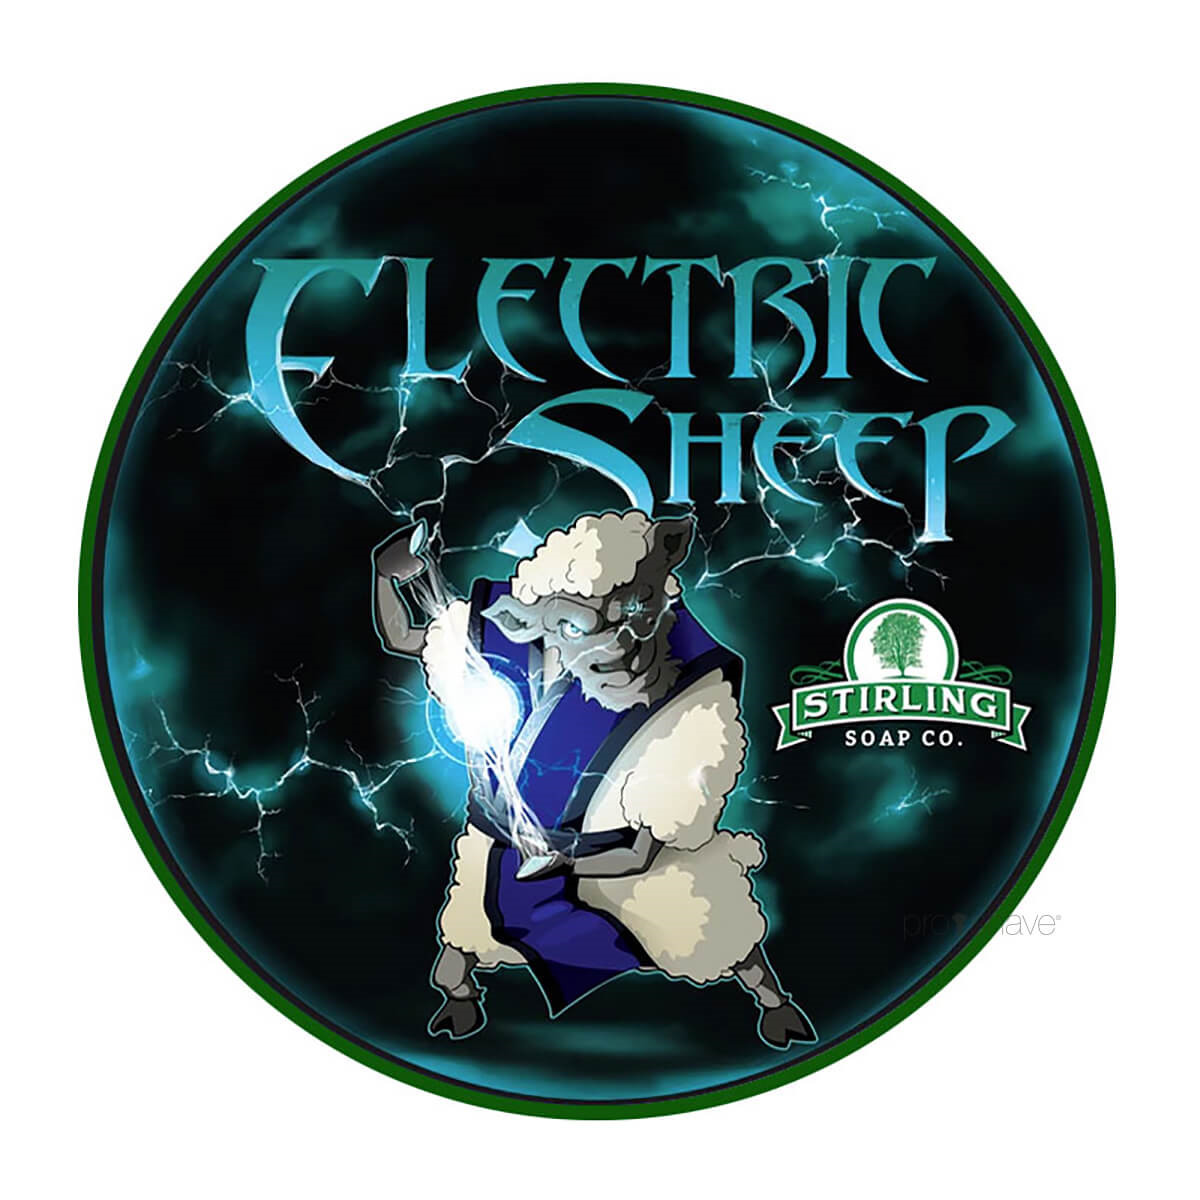 Stirling Soap Co. Barbersæbe, Electric Sheep, 170 ml.